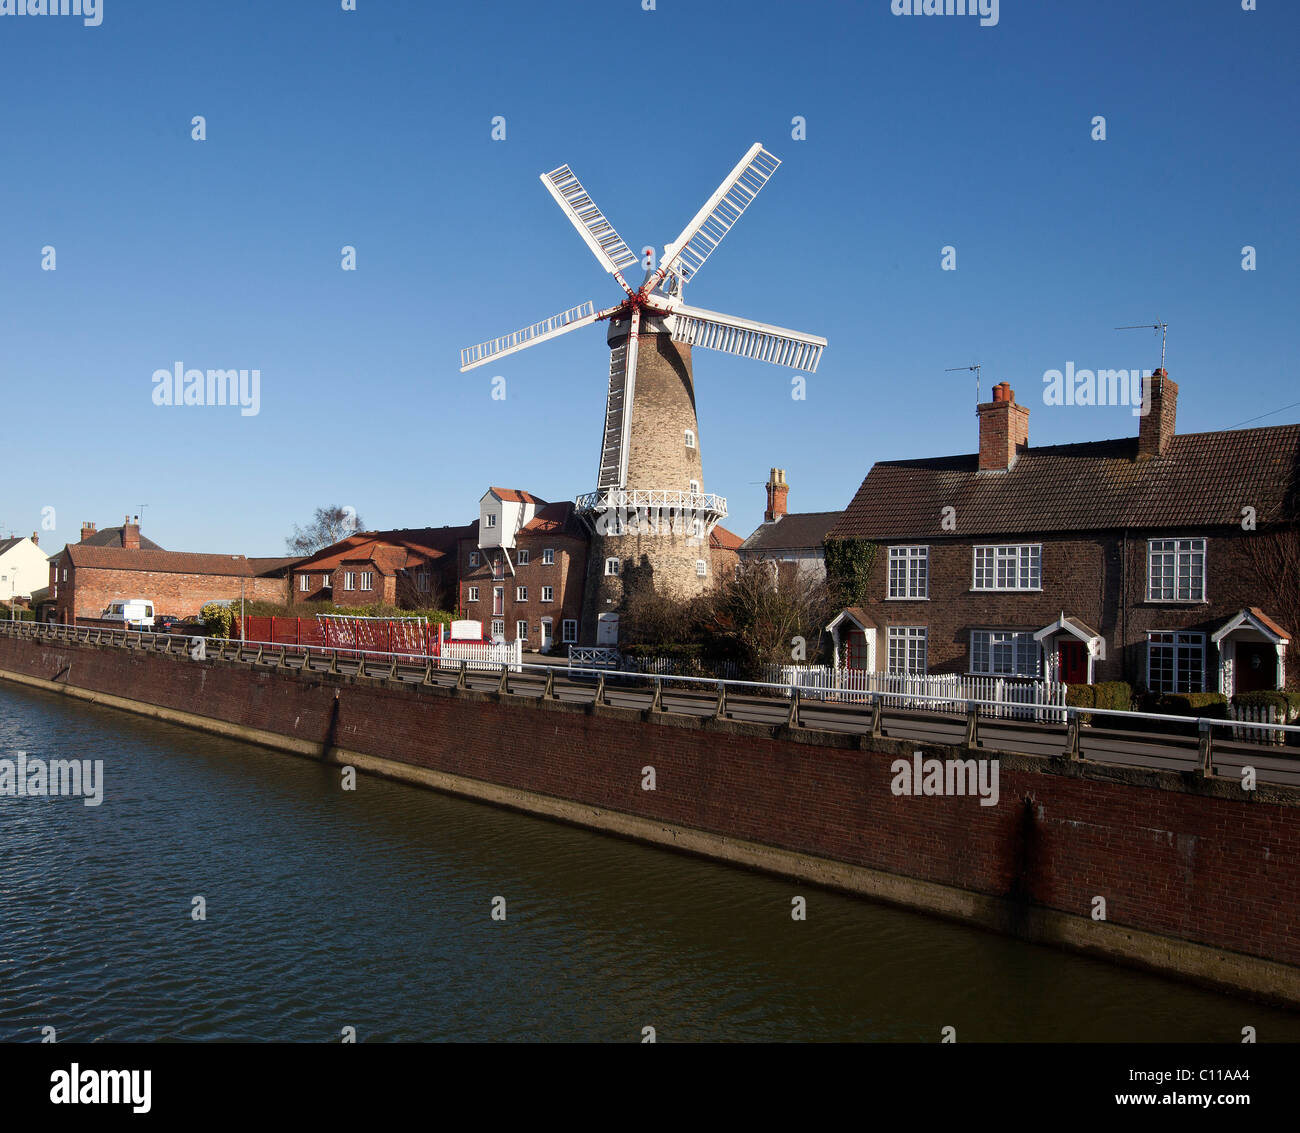 Boston, Lincolnshire. Pictured is the Maud Foster Mill by the canal in Boston centre. Photo by Fabio De Paola Stock Photo